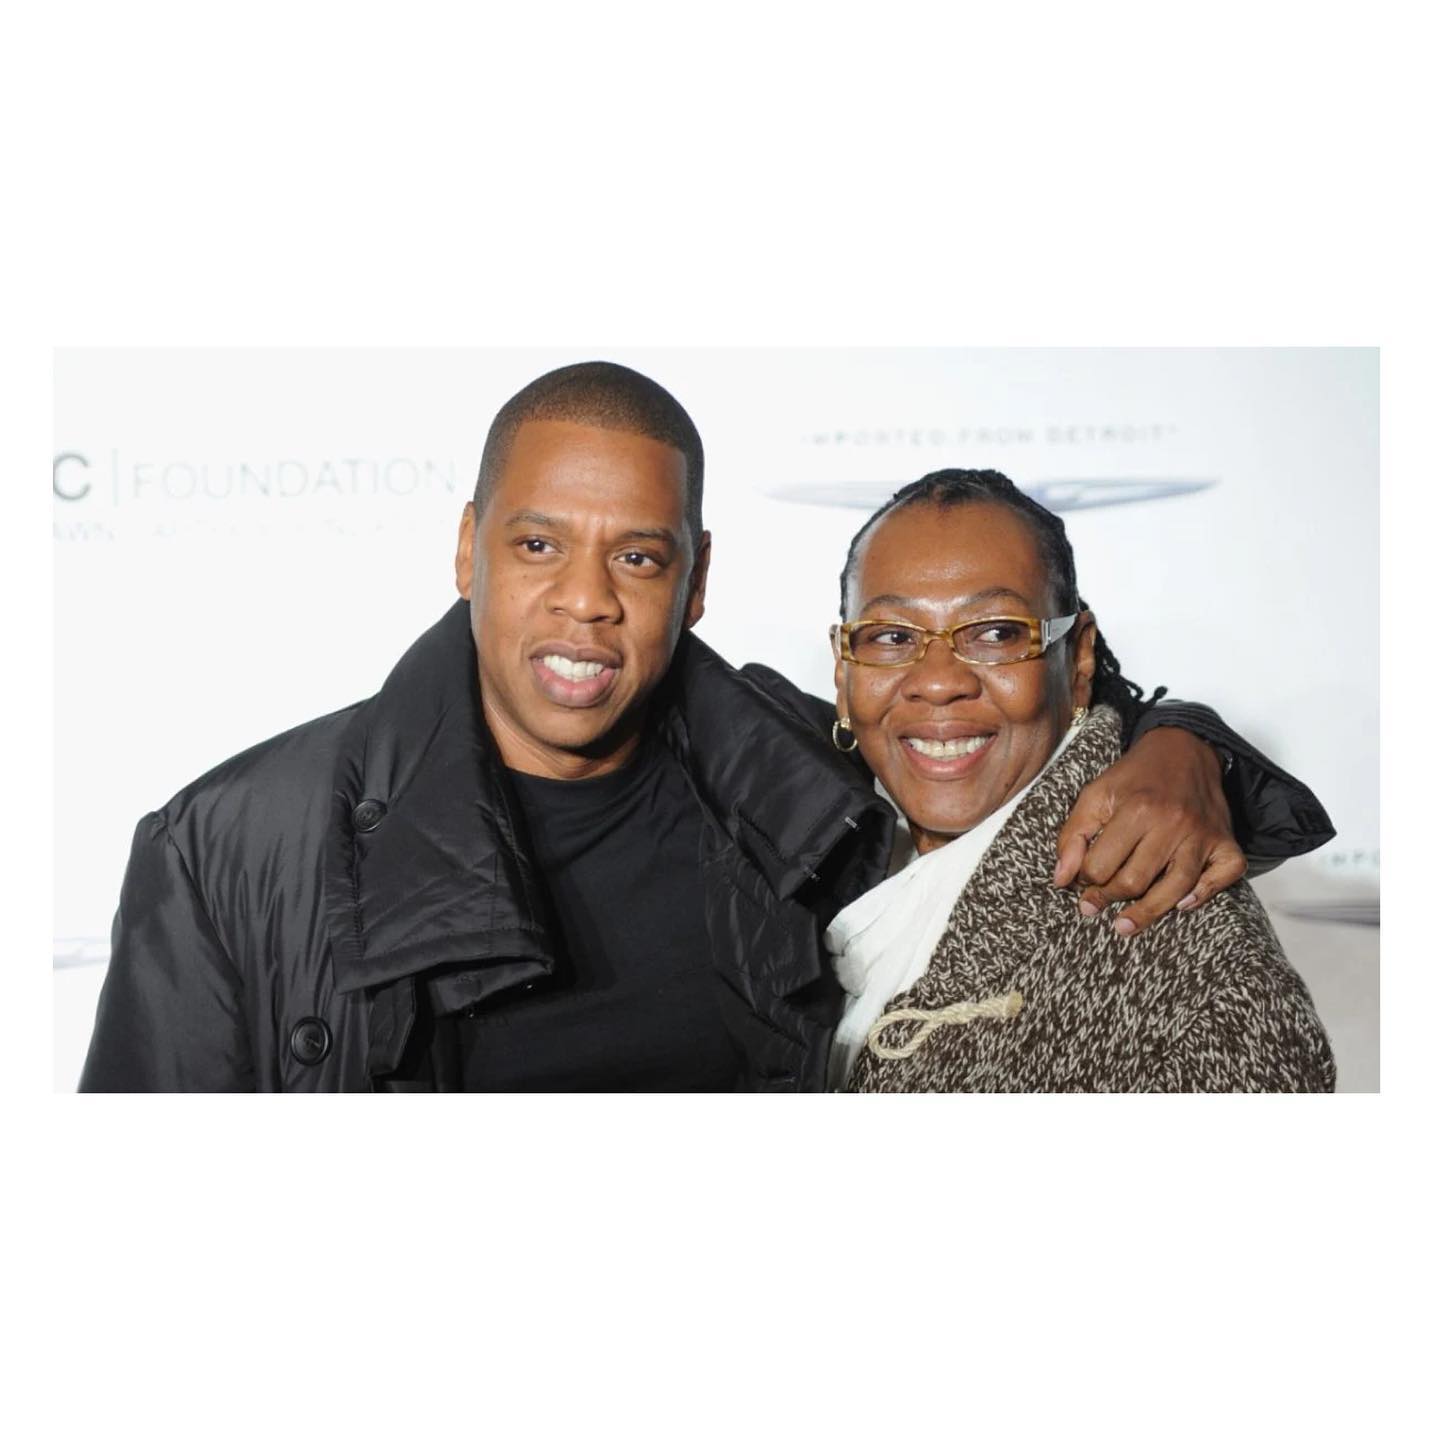 Rapper Jay Z's Mother Ties The Knot With Her Longtime Partner In The U.S.